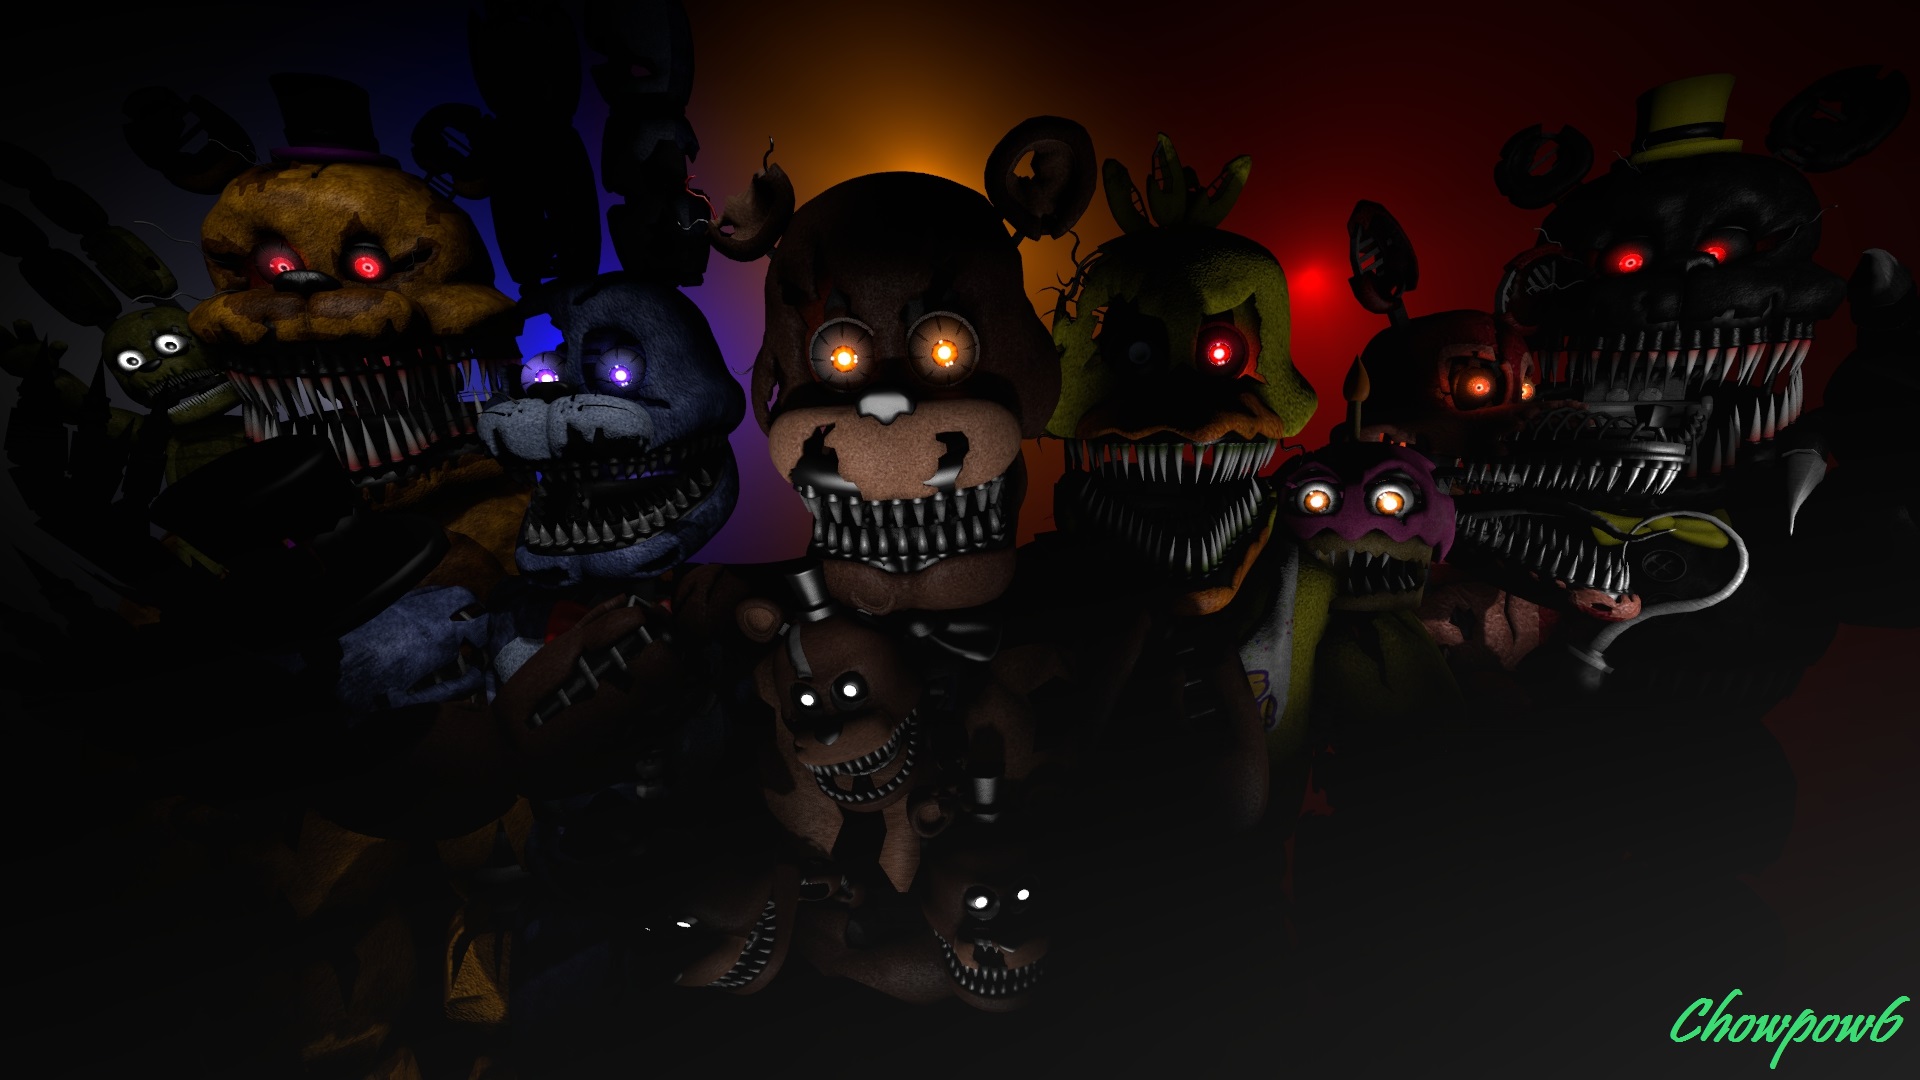 Five Night at Freddy's 4 Poster (SFM) by Chowie333 on DeviantArt